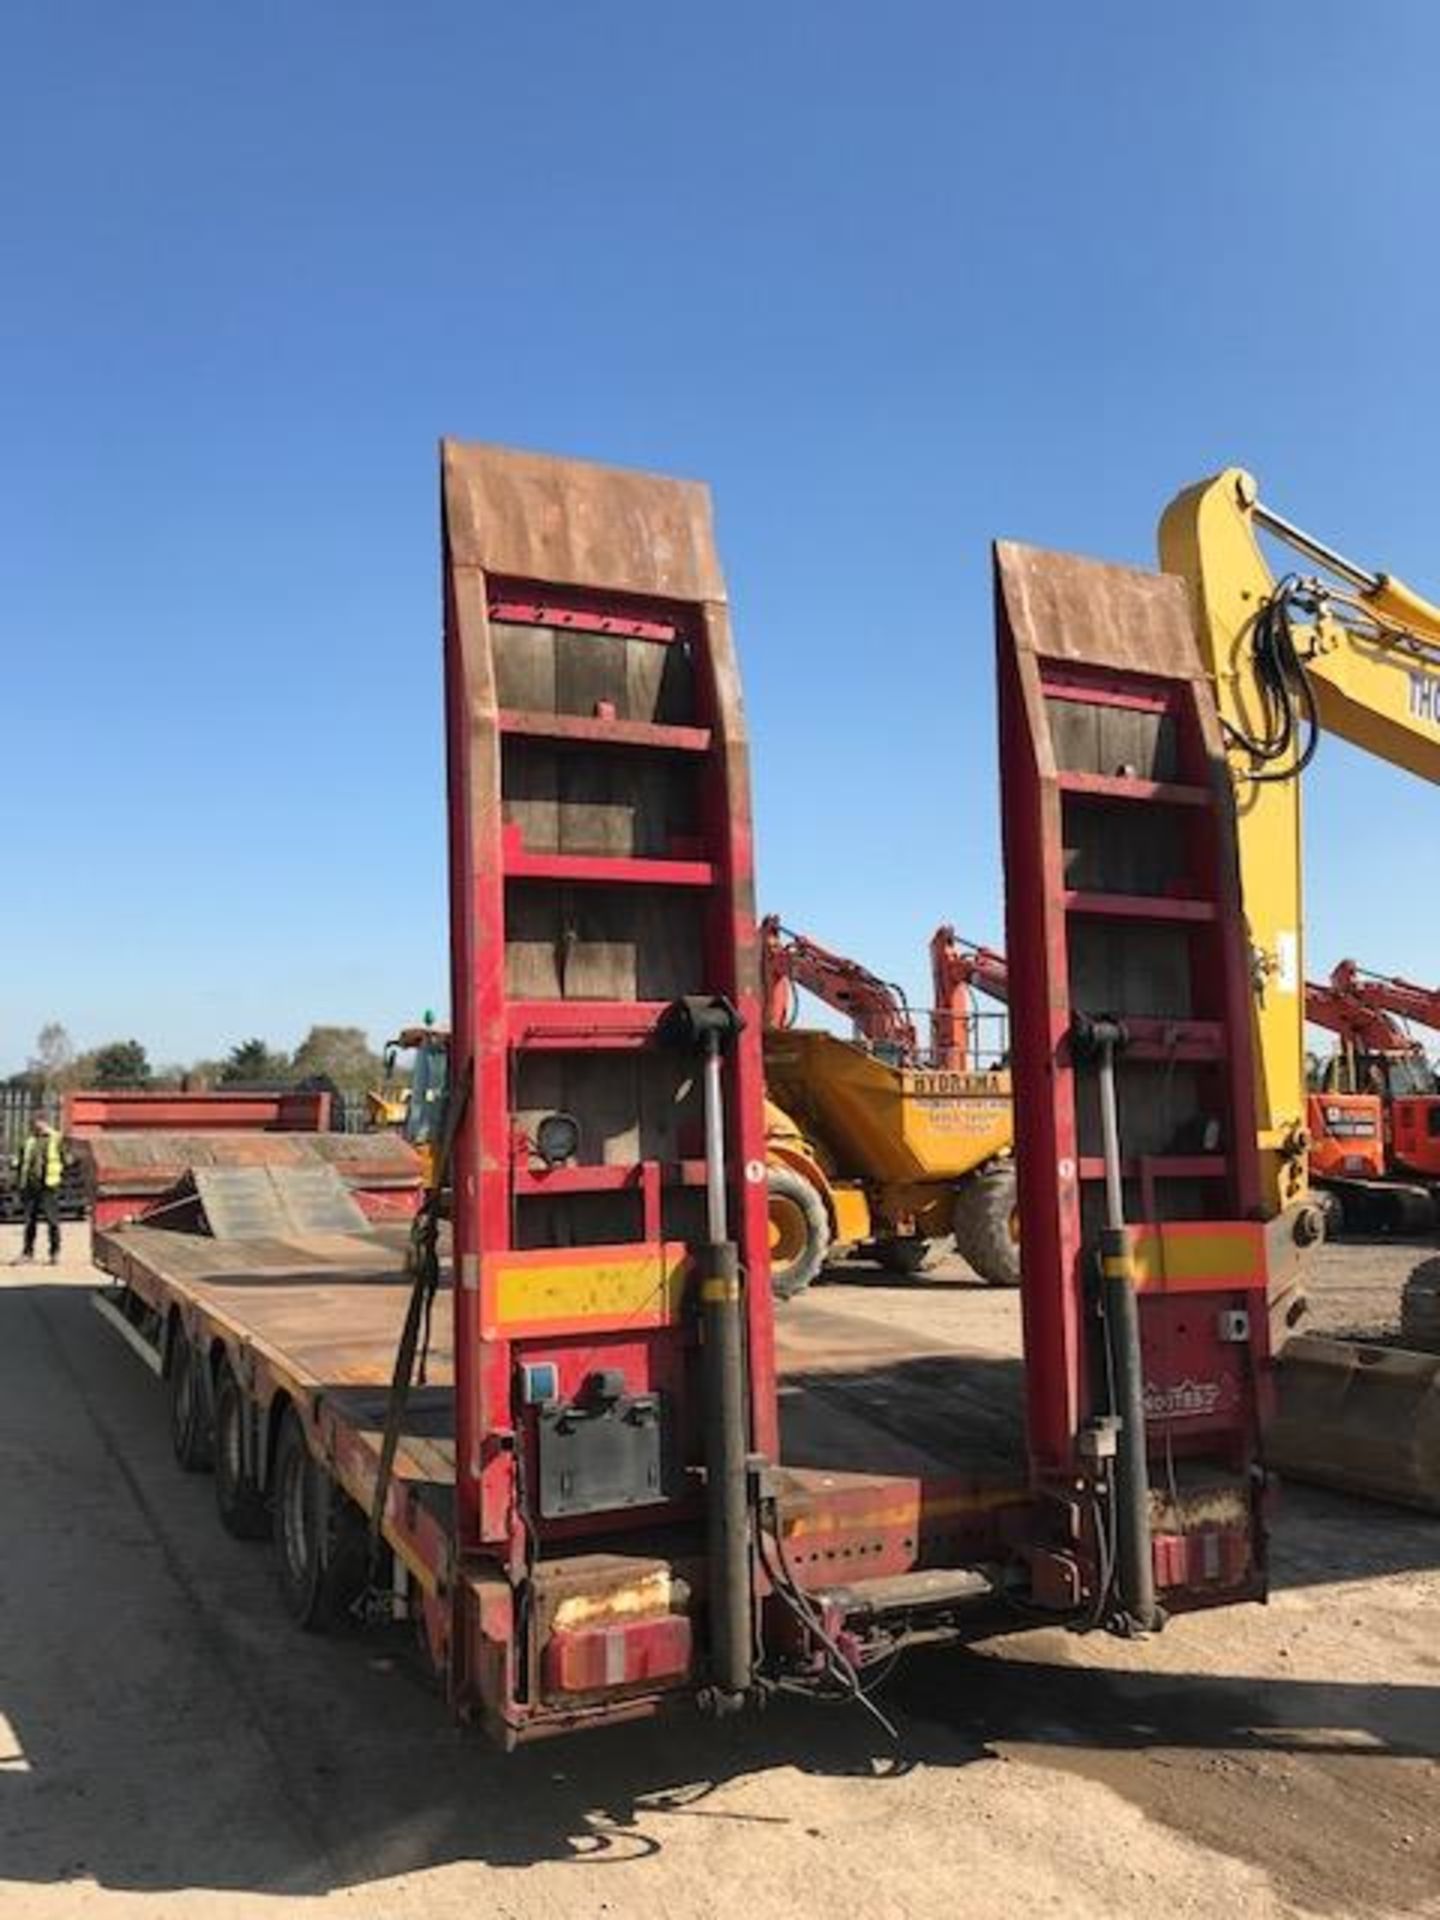 Nooteboom OSDS-48-03V EB Triaxle Extending Low Loader - 50P35-1 - Image 2 of 8